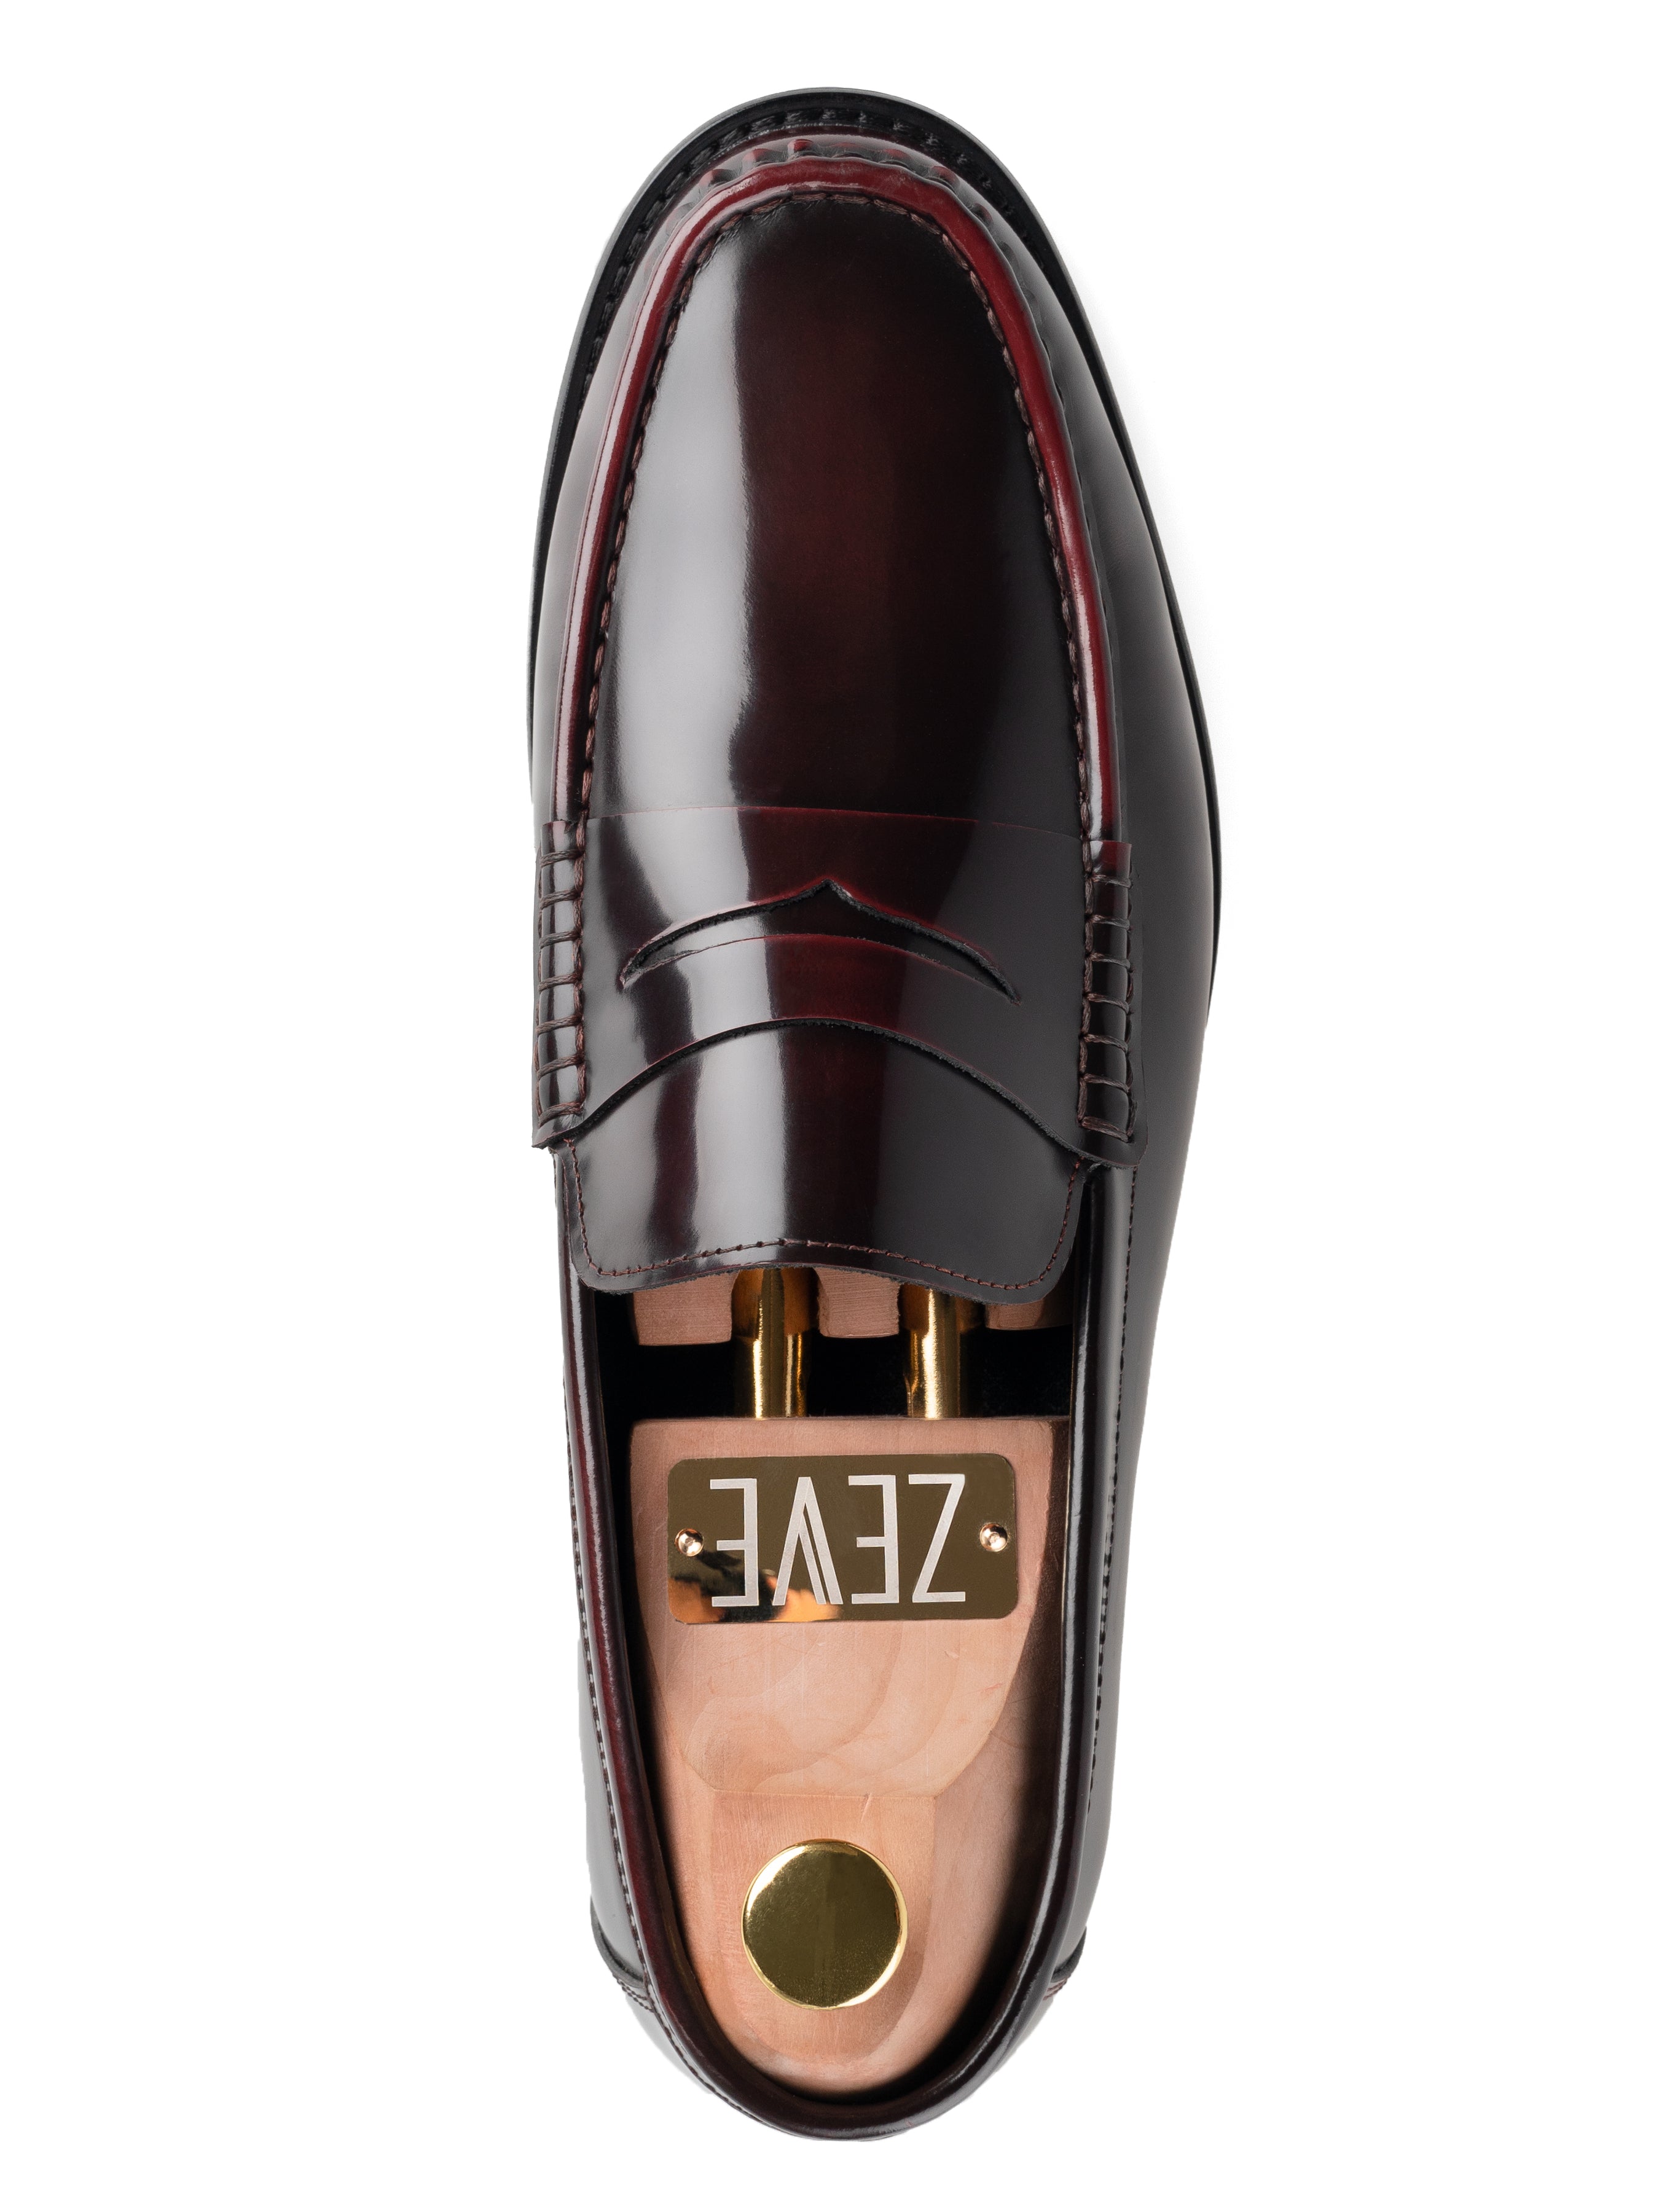 Marco Penny Loafer - Red Burgundy Polished Leather